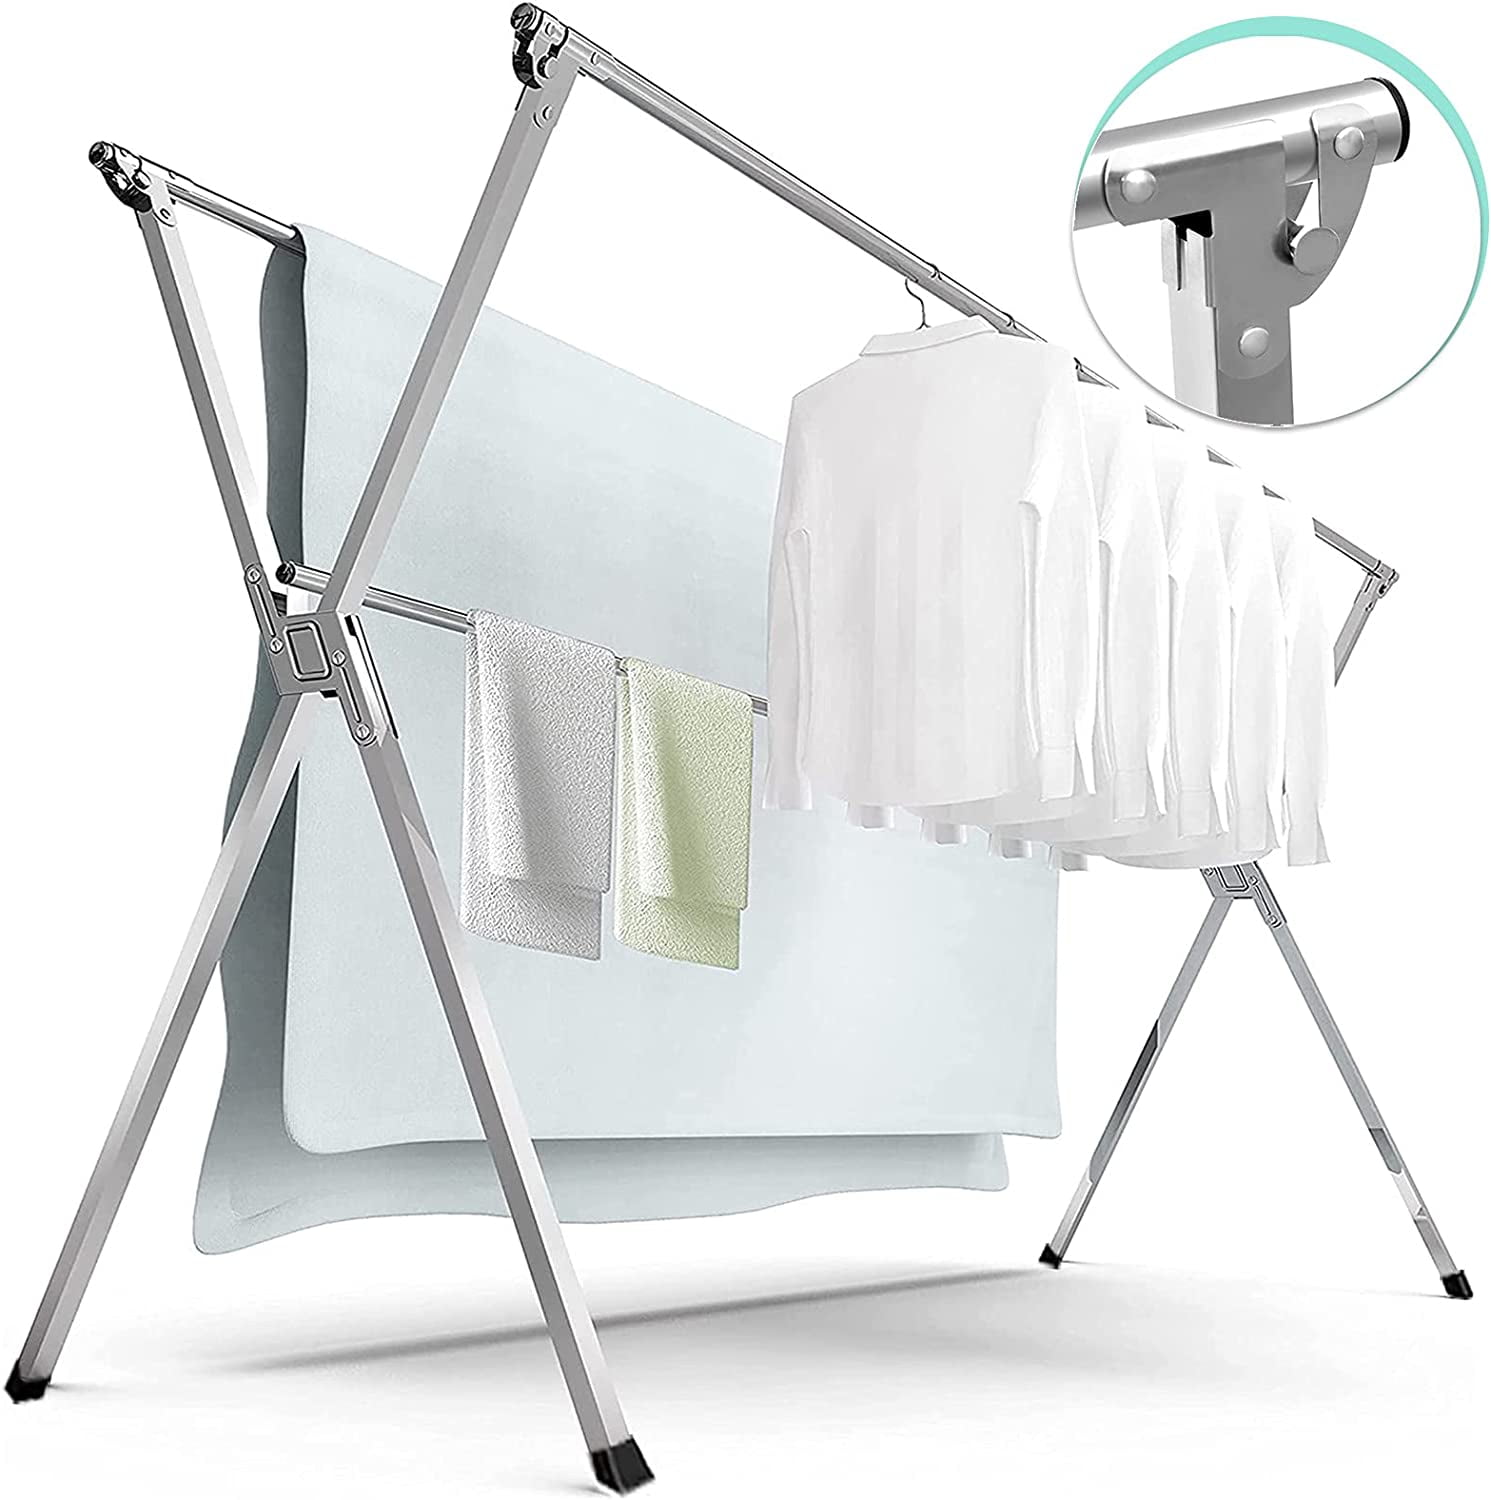 Details about   Laundry Drying Rack Heavy Duty Collapsible Folding Clothes Stainless Steel 